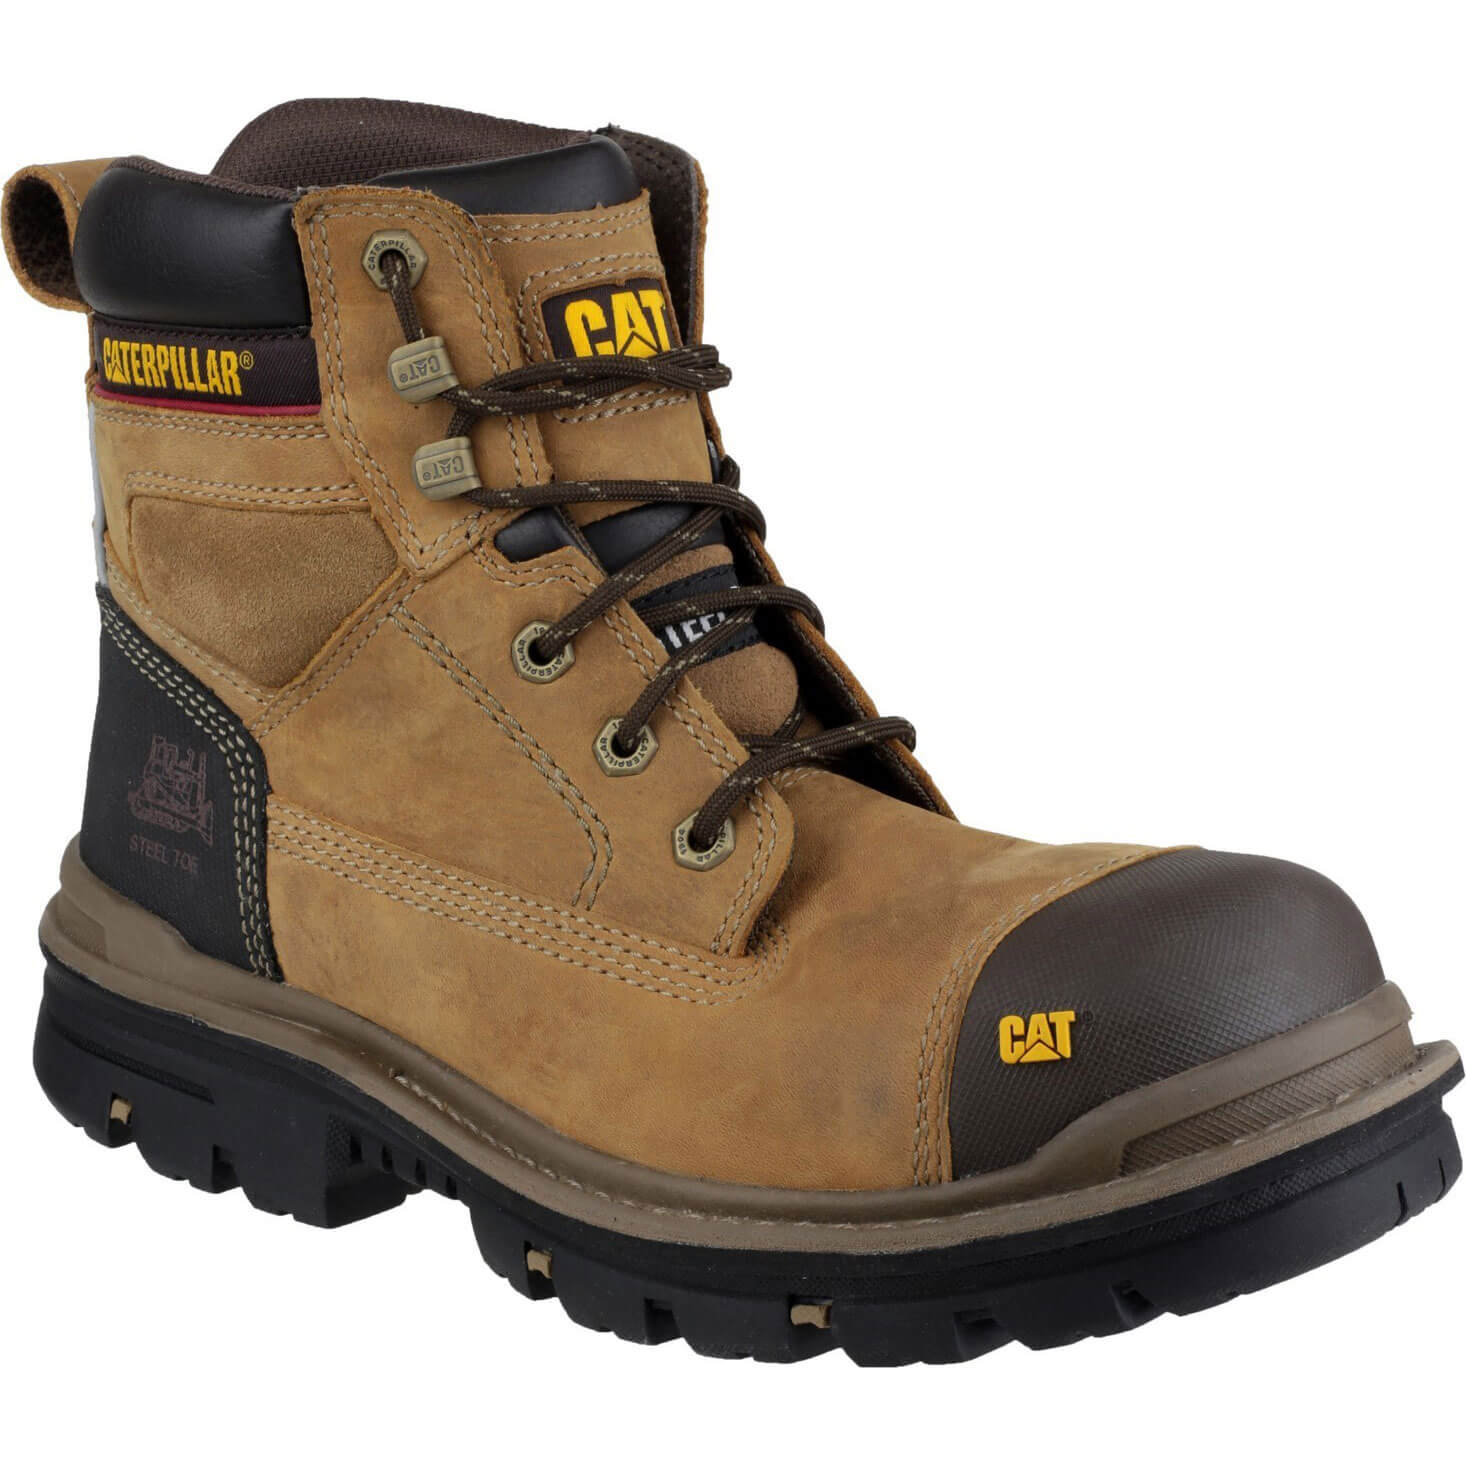 Image of Caterpillar Mens Gravel Safety Boots Beige Size 12